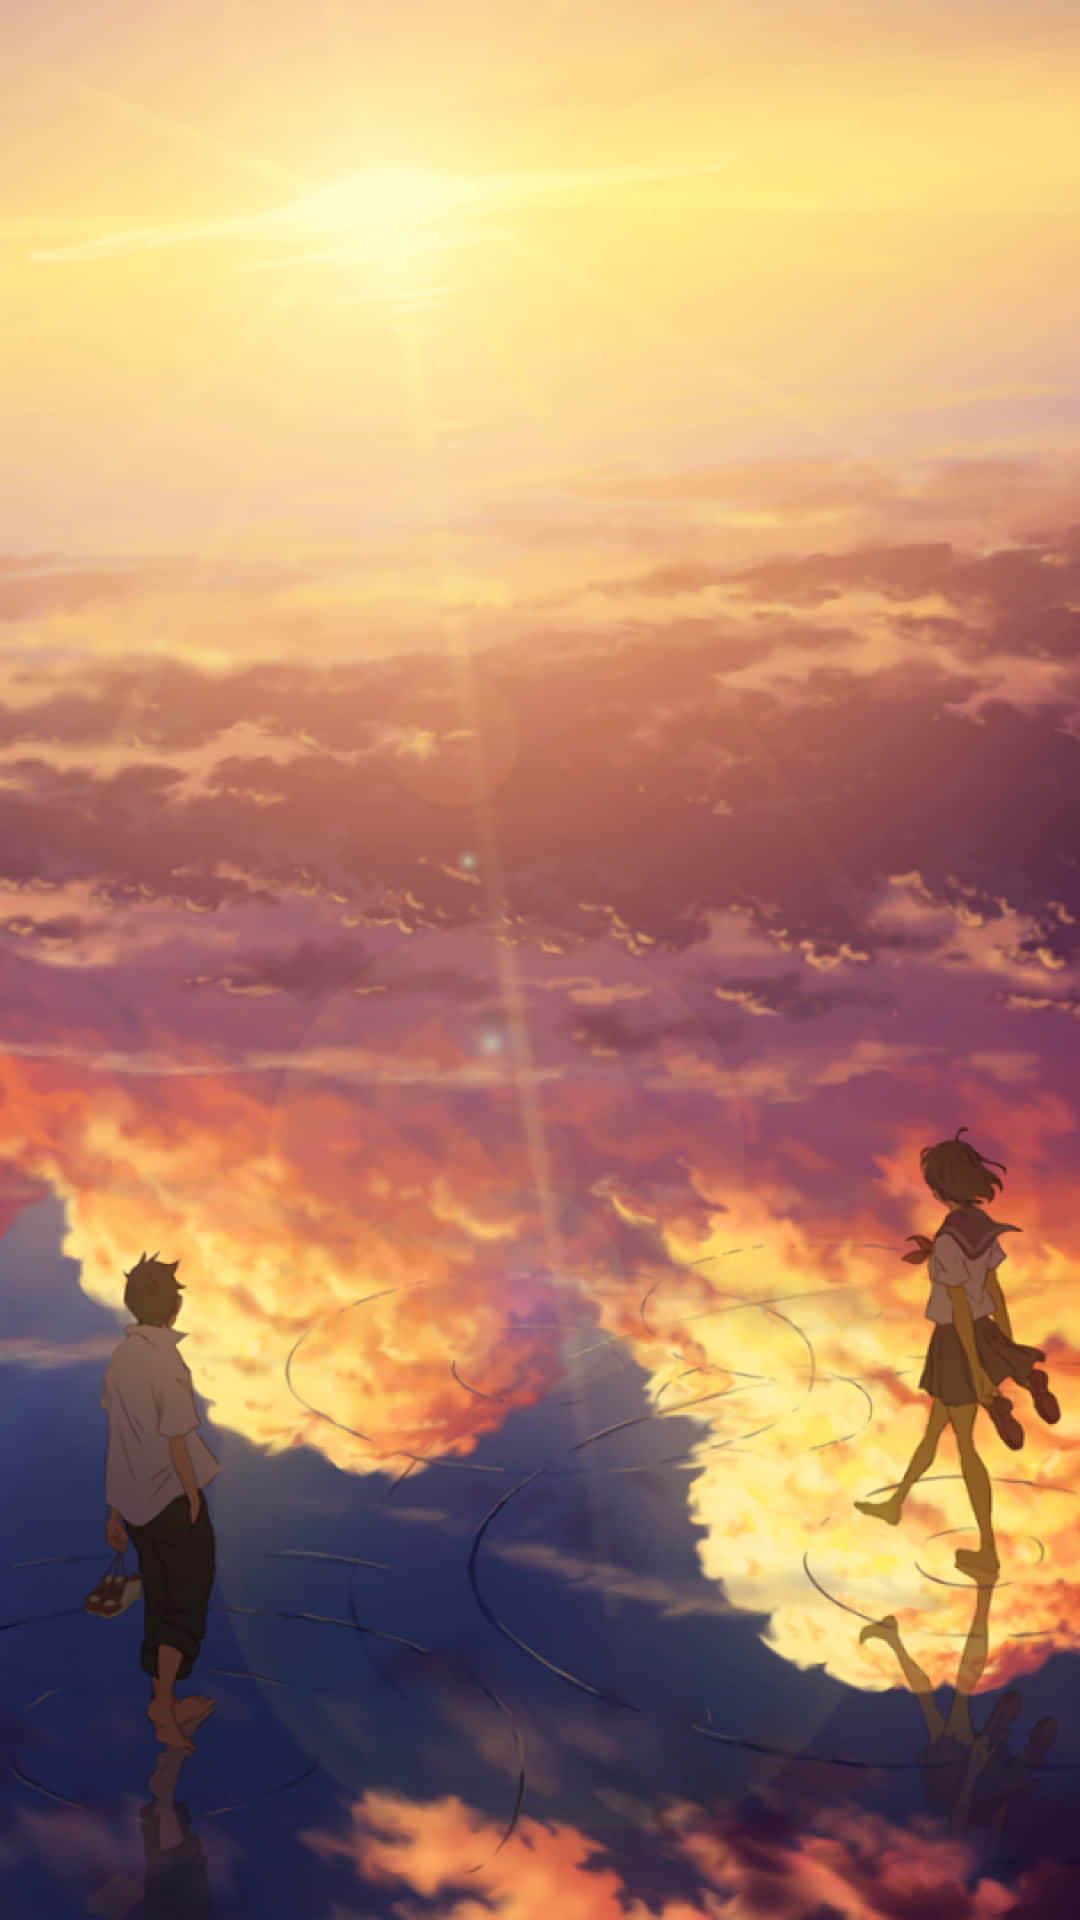 Enjoying the serenity of a colorful anime sunset. Wallpaper